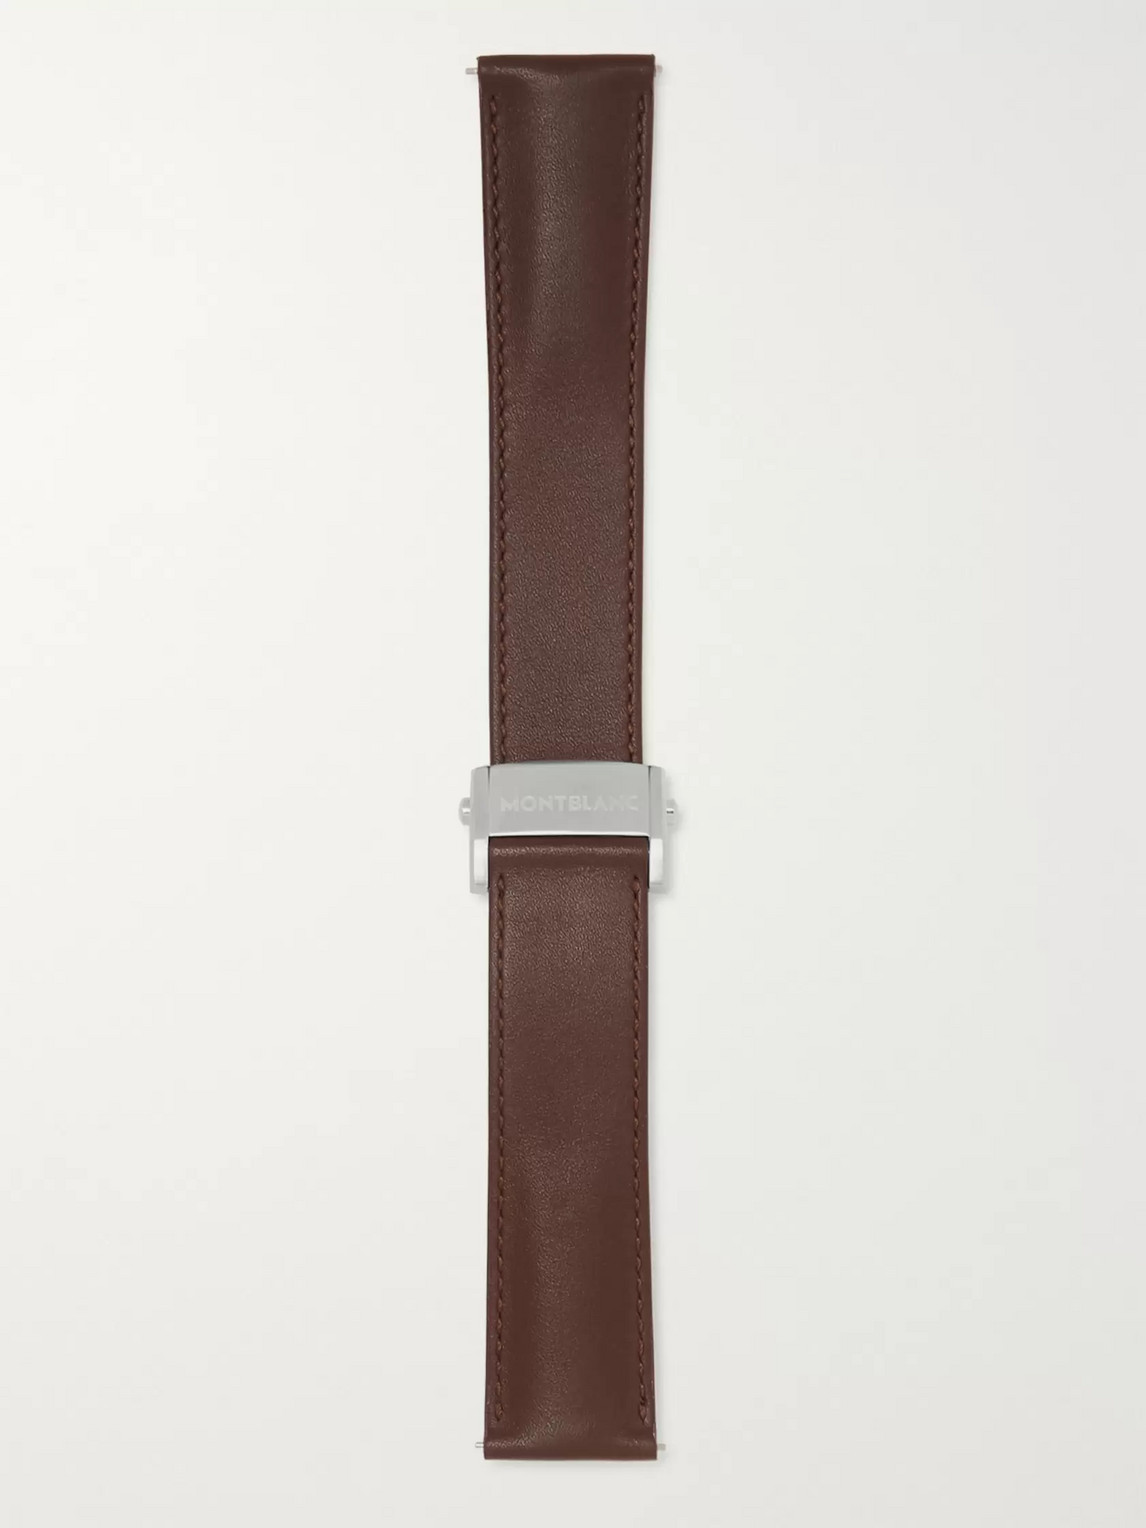 MONTBLANC LEATHER WATCH STRAP